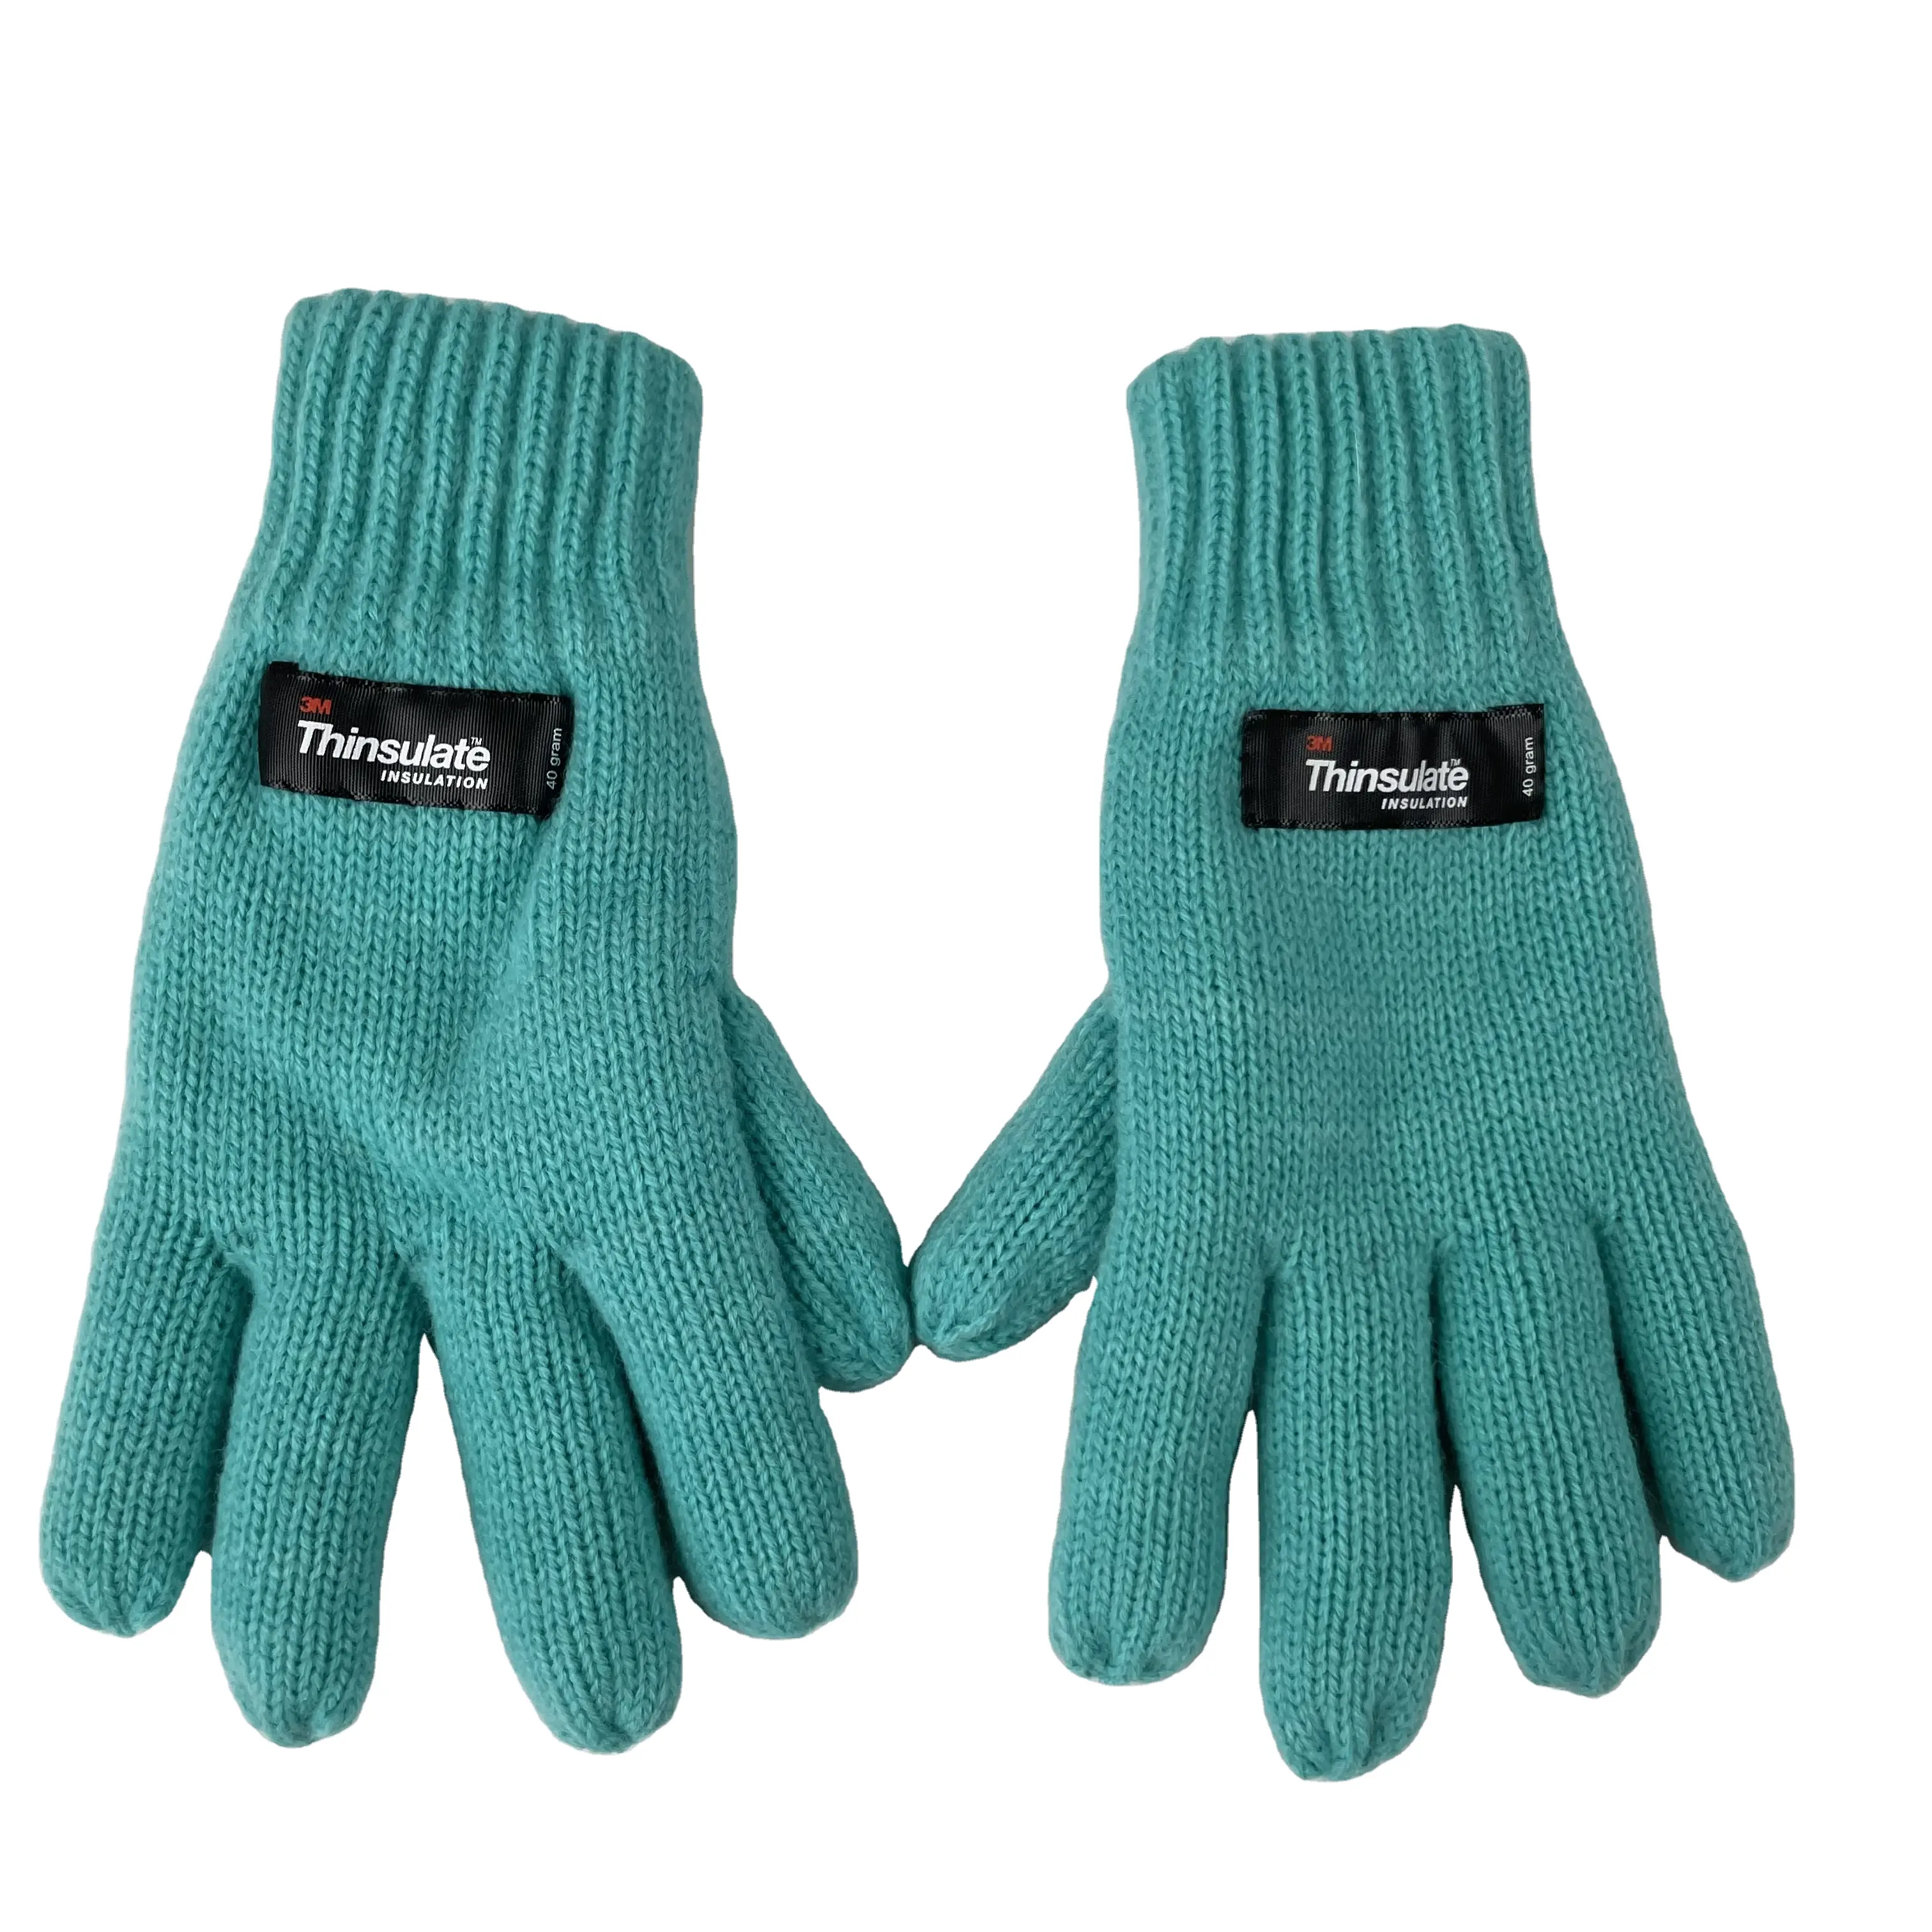 Wholesale custom jacquard knit winter 100% acrylic mitten glove with thinsulate inside